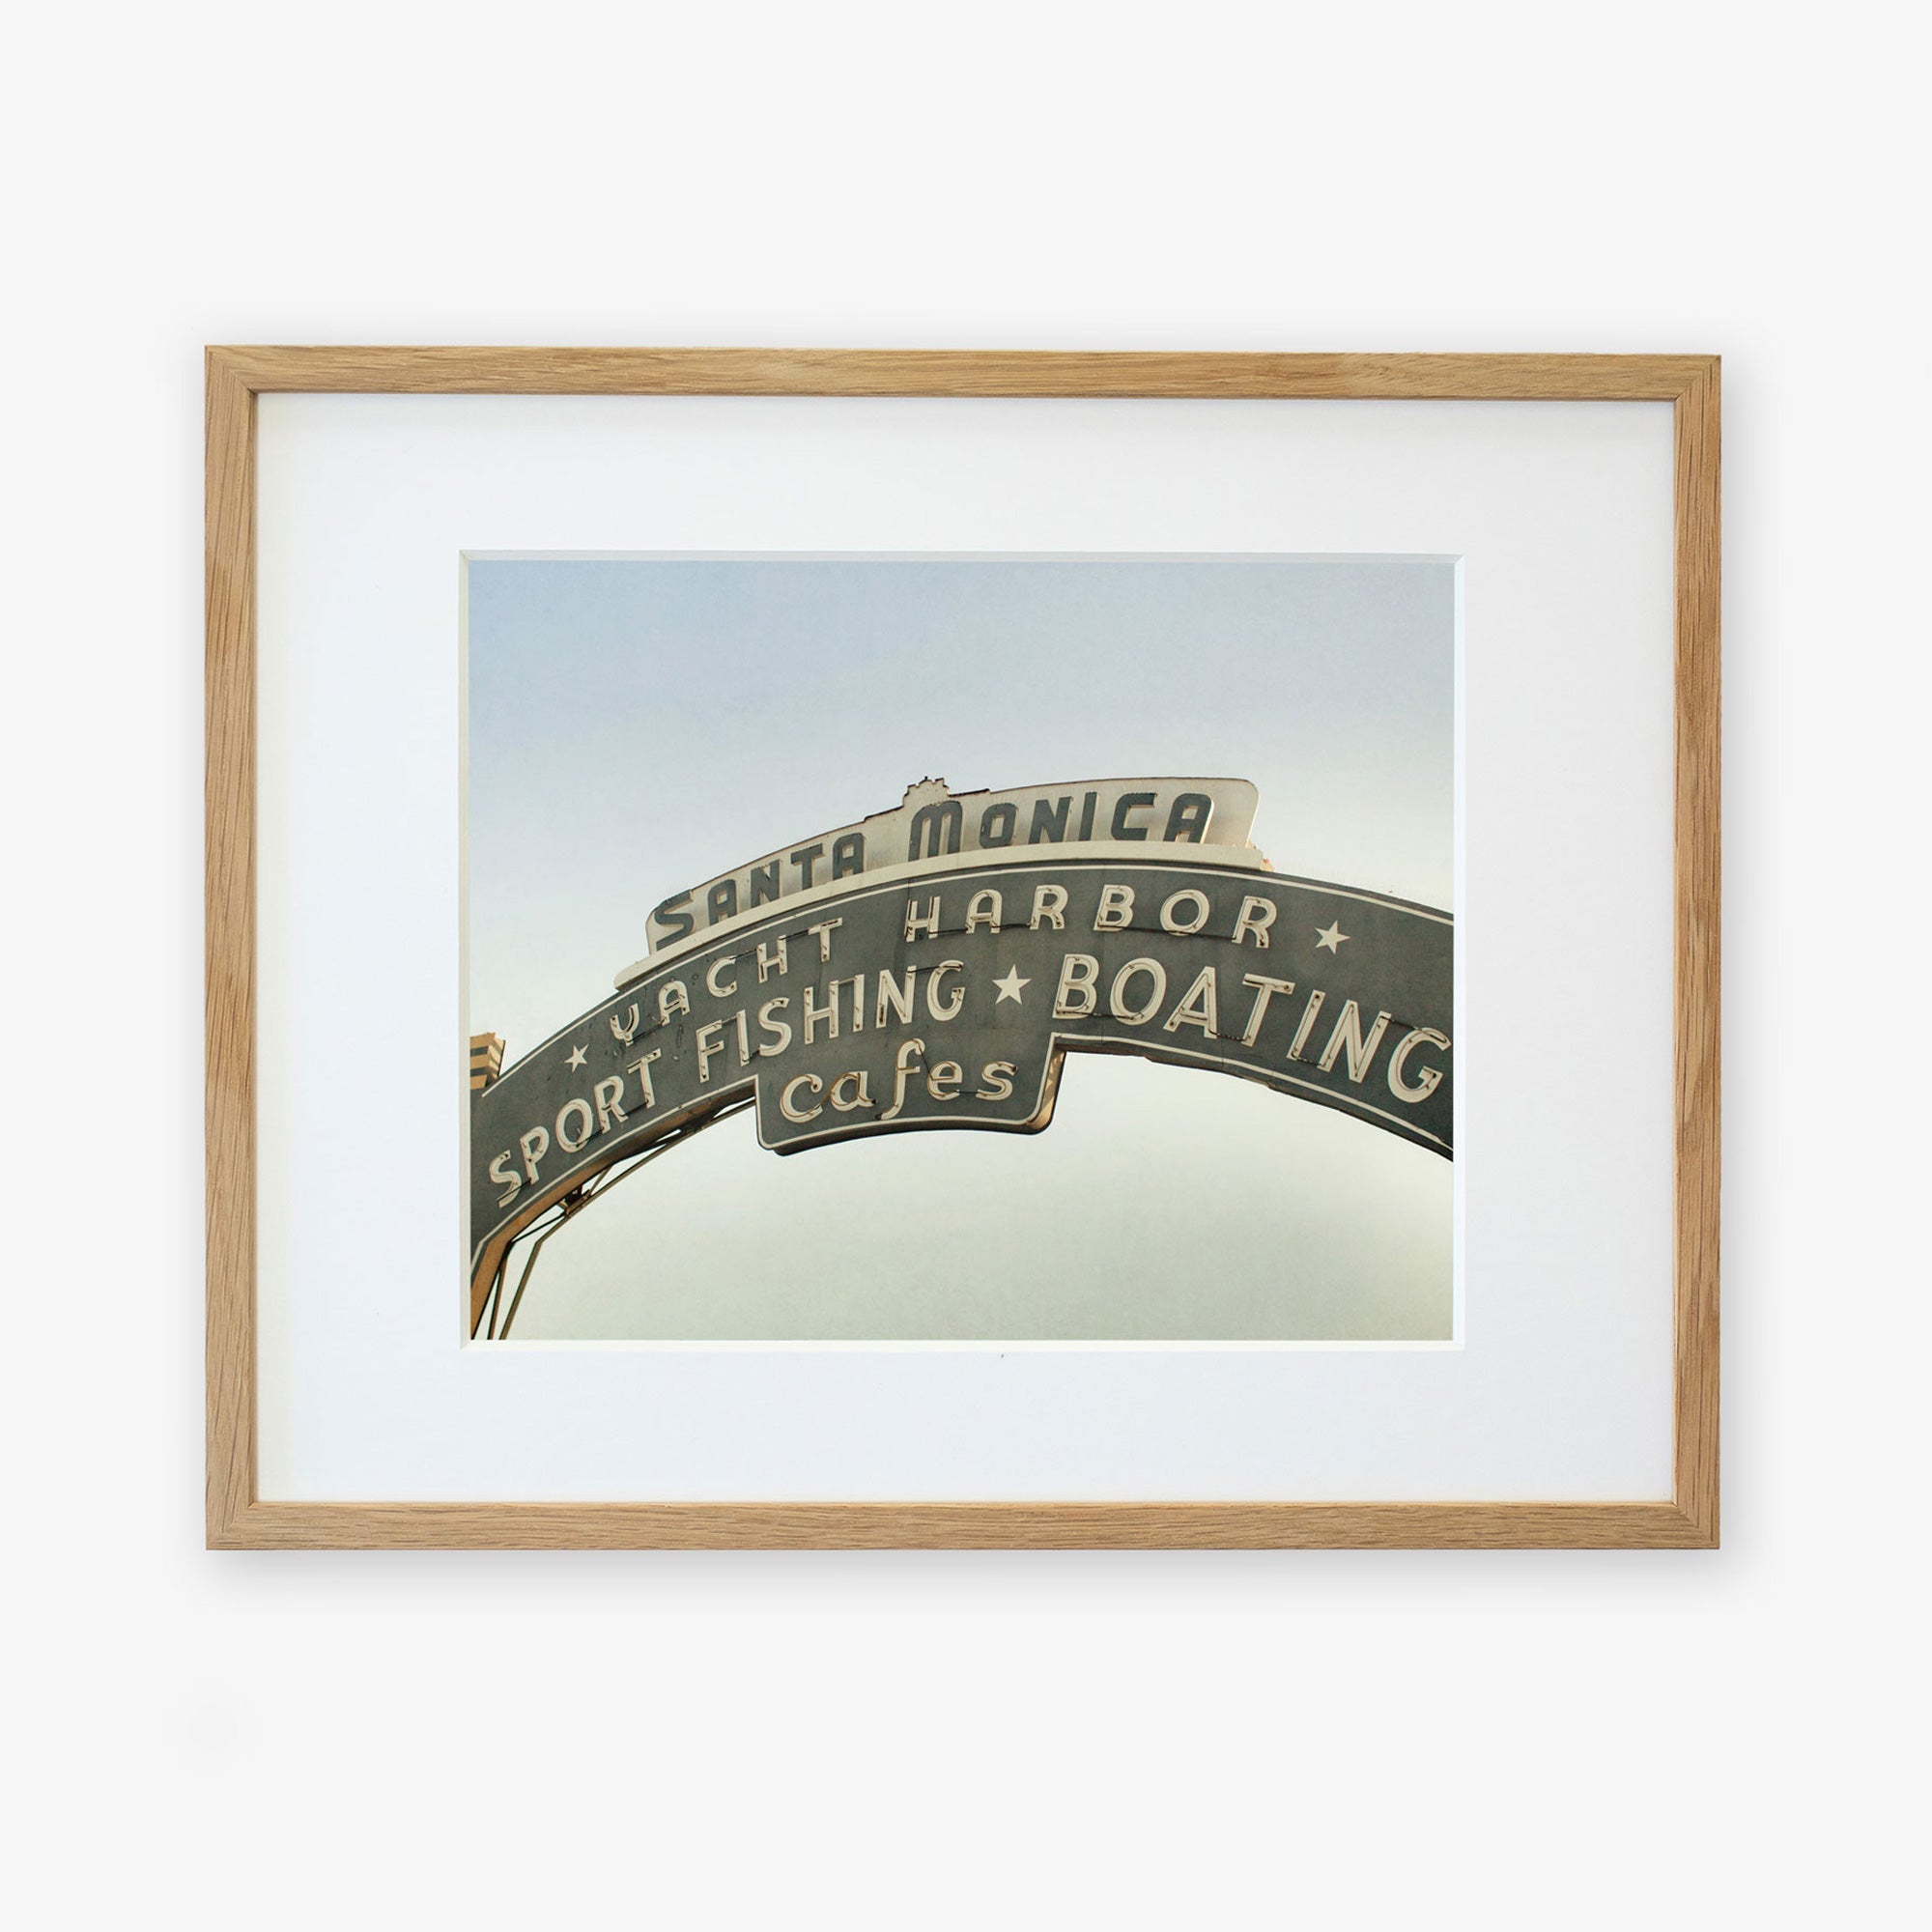 Framed archival photographic print of the Los Angeles California Print, &#39;Santa Monica Pier Blues&#39; by Offley Green, featuring the iconic Santa Monica sign with text highlighting yacht harbor, sport fishing, boating, and cafes, displayed against a clear sky.